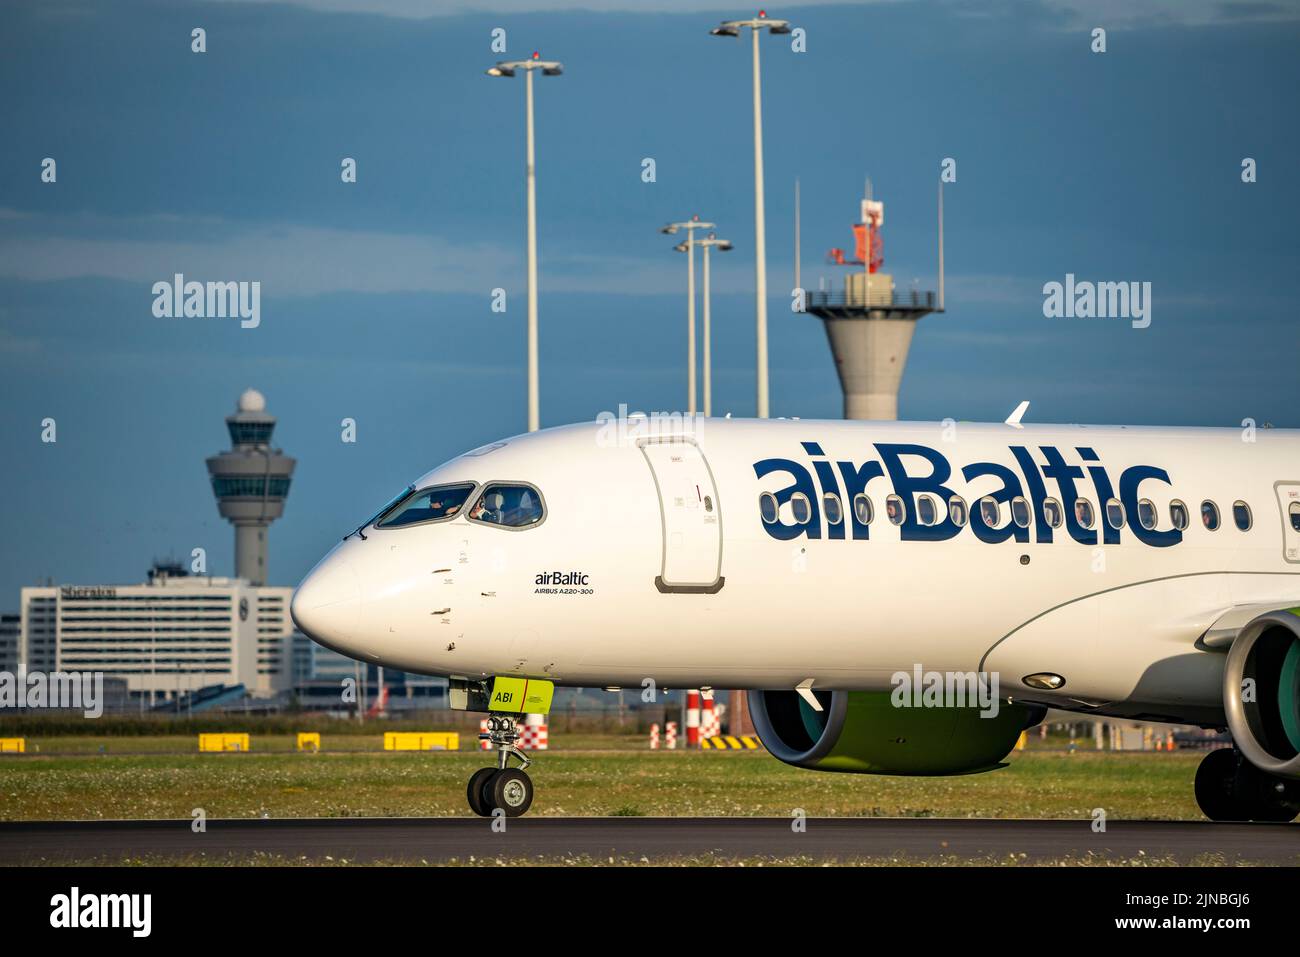 Amsterdam Shiphol Airport, Polderbaan, one of 6 runways, tower air traffic control, on taxiway for take-off, Airbaltic, Airbus A220 Stock Photo